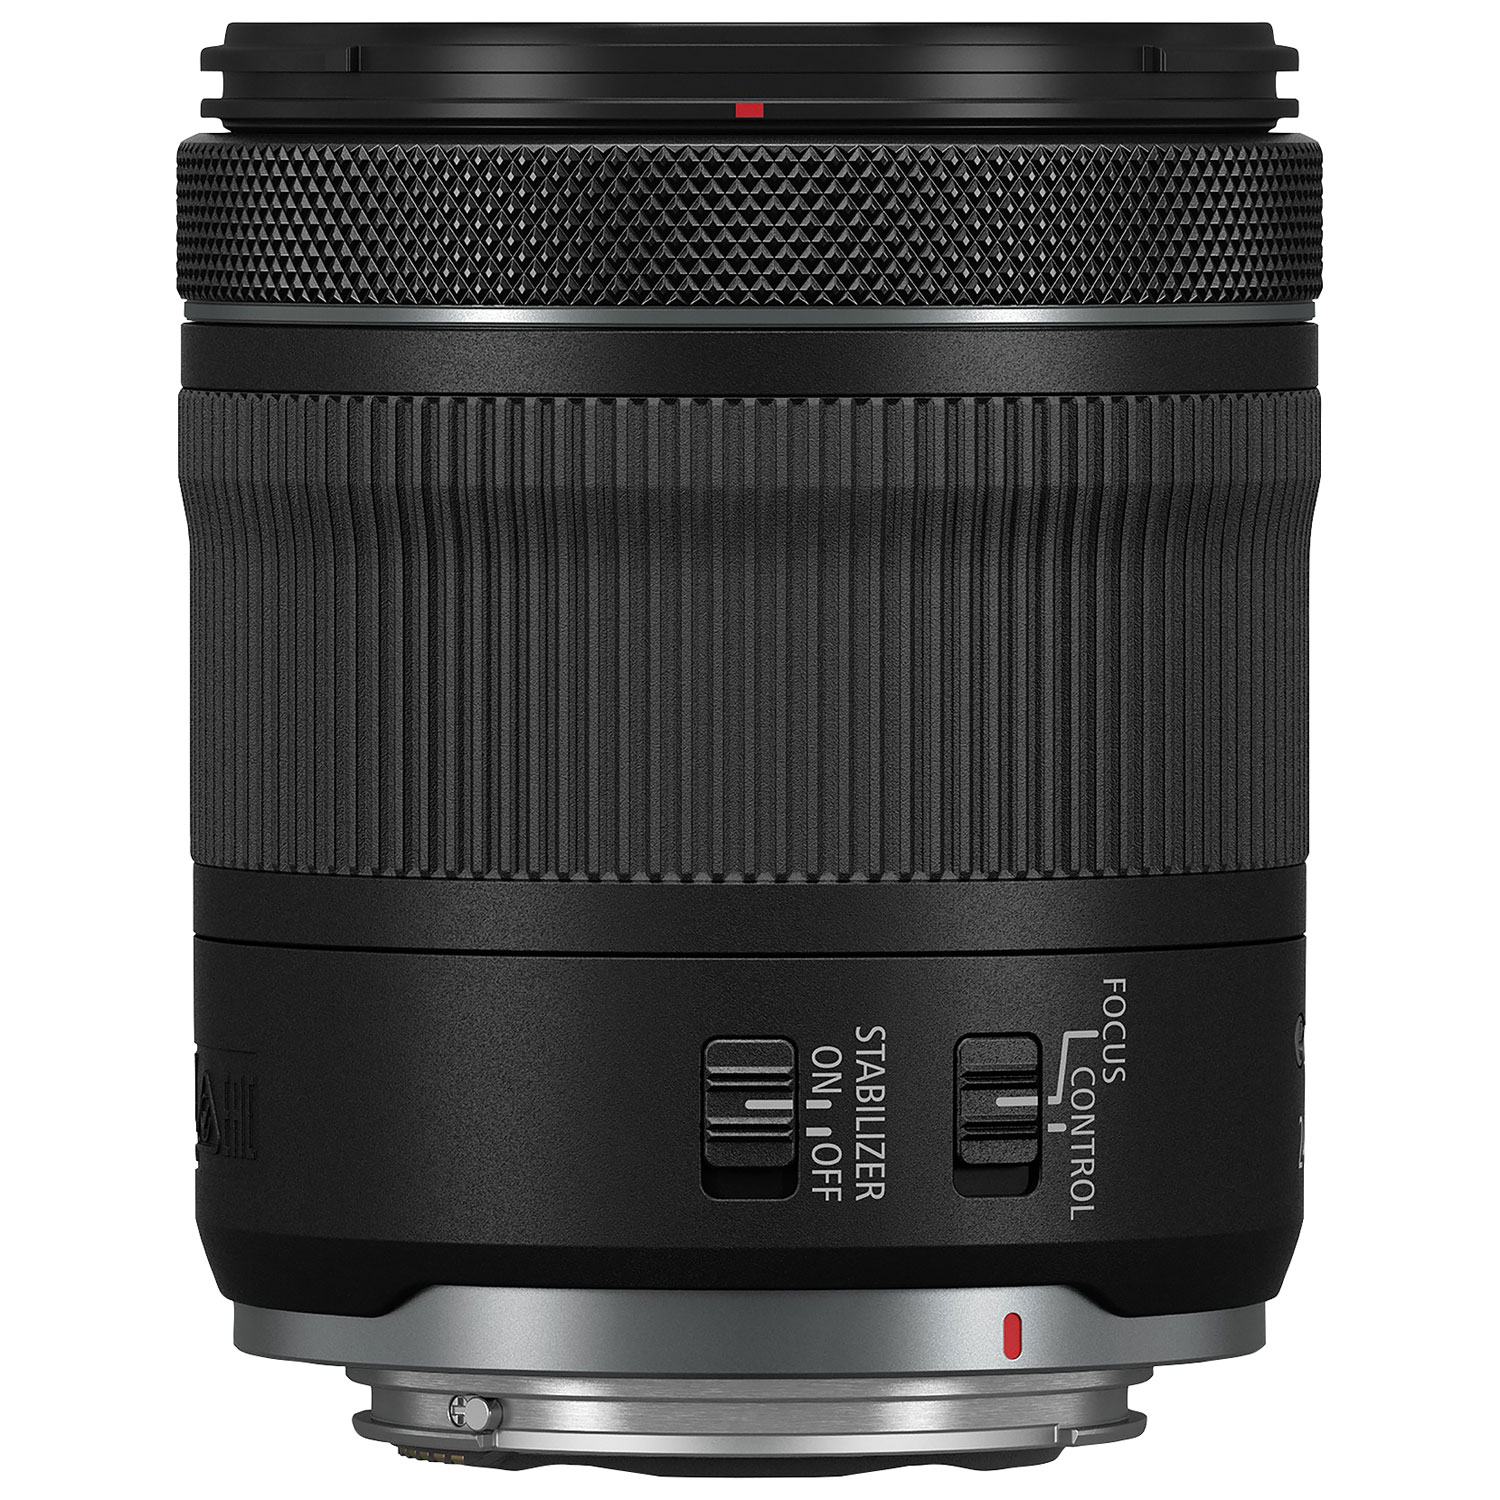 Canon RF 24-105mm f/4-7.1 IS STM Lens | Best Buy Canada